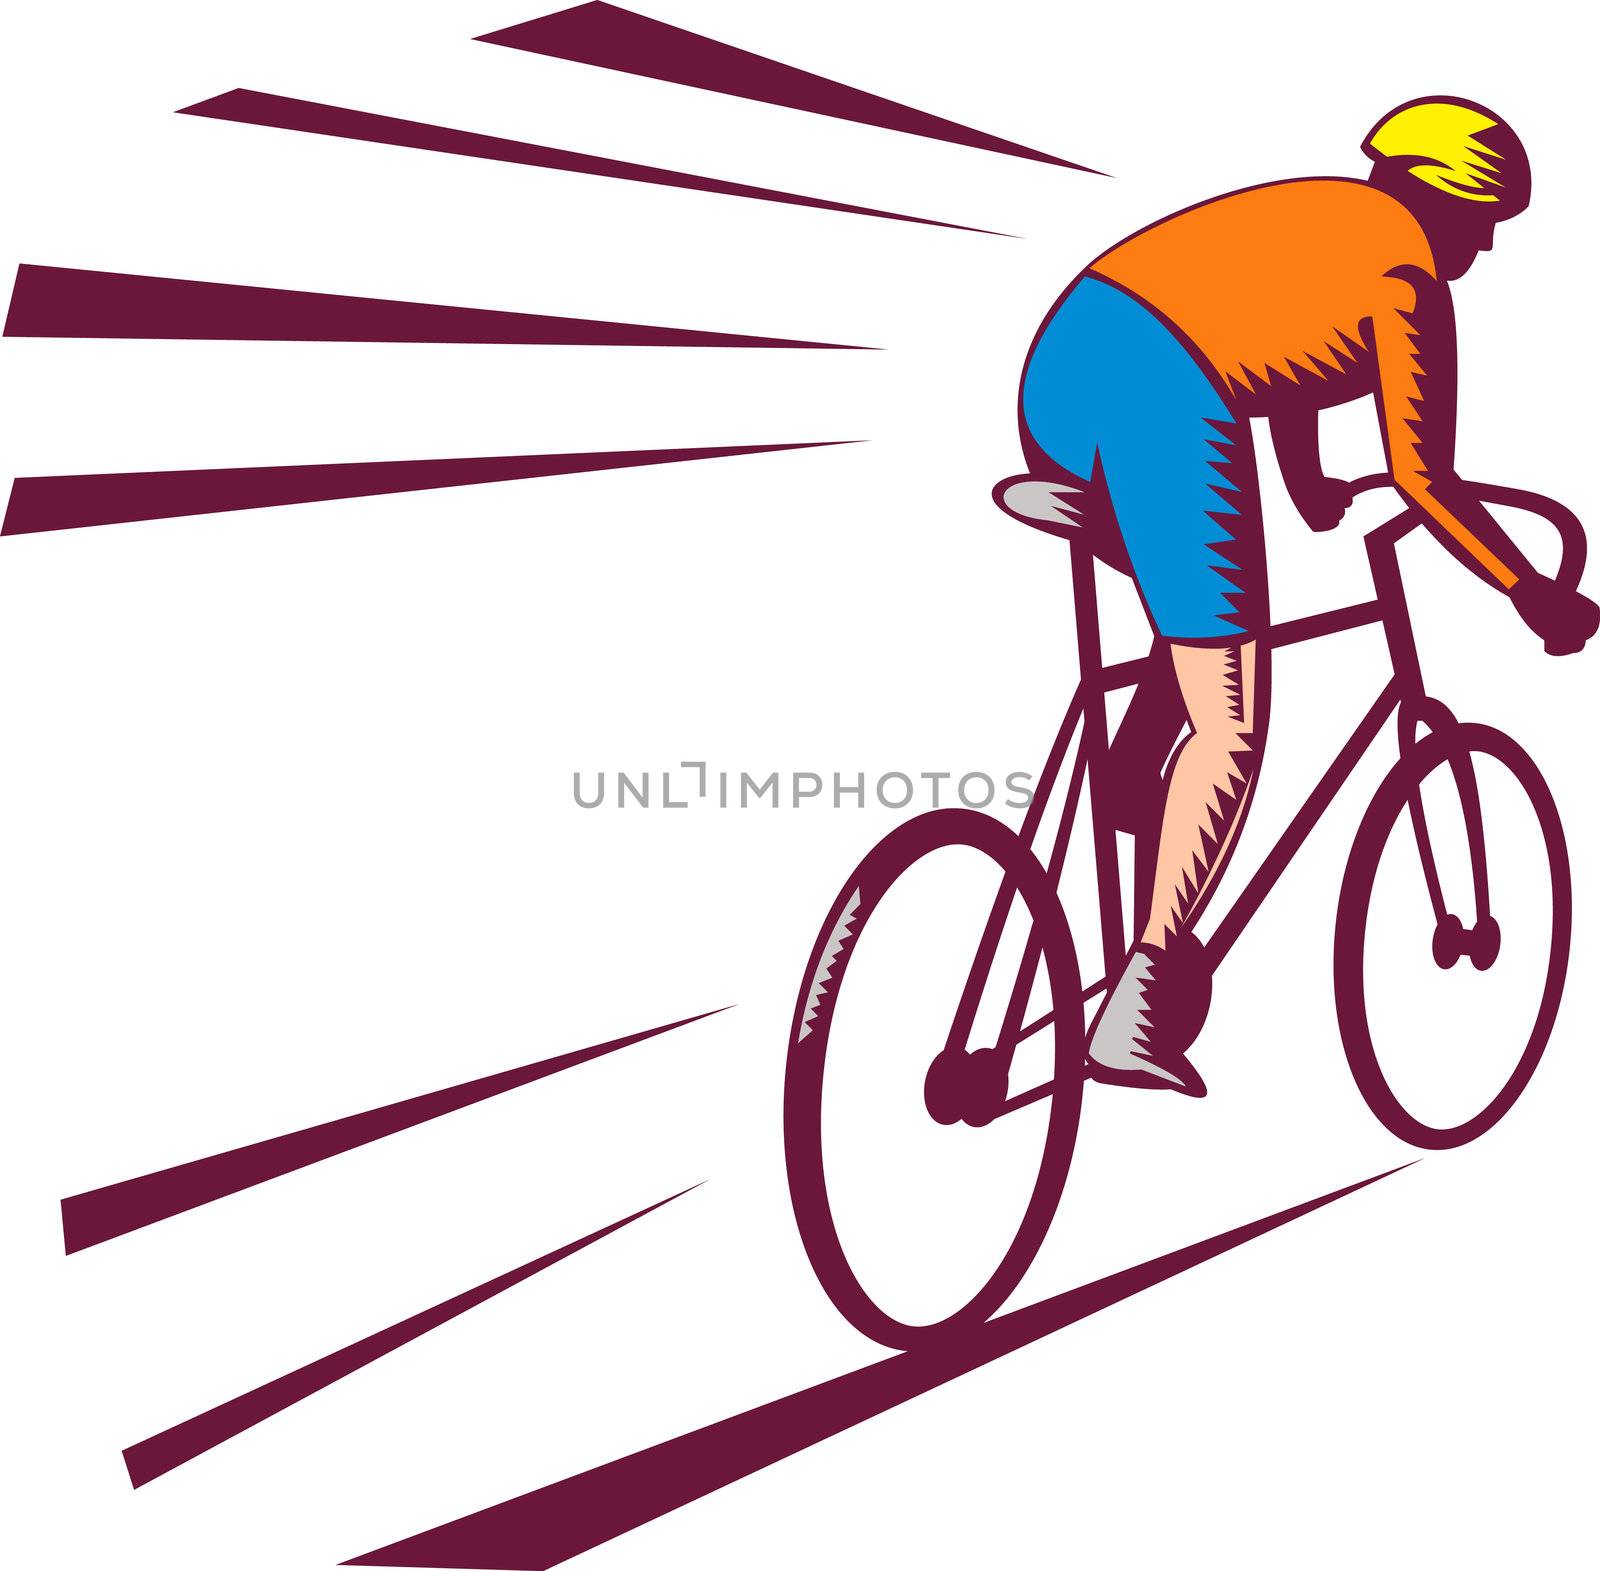 illustration of a Cyclist racing on bicycle viewed from rear done in woodcut style.